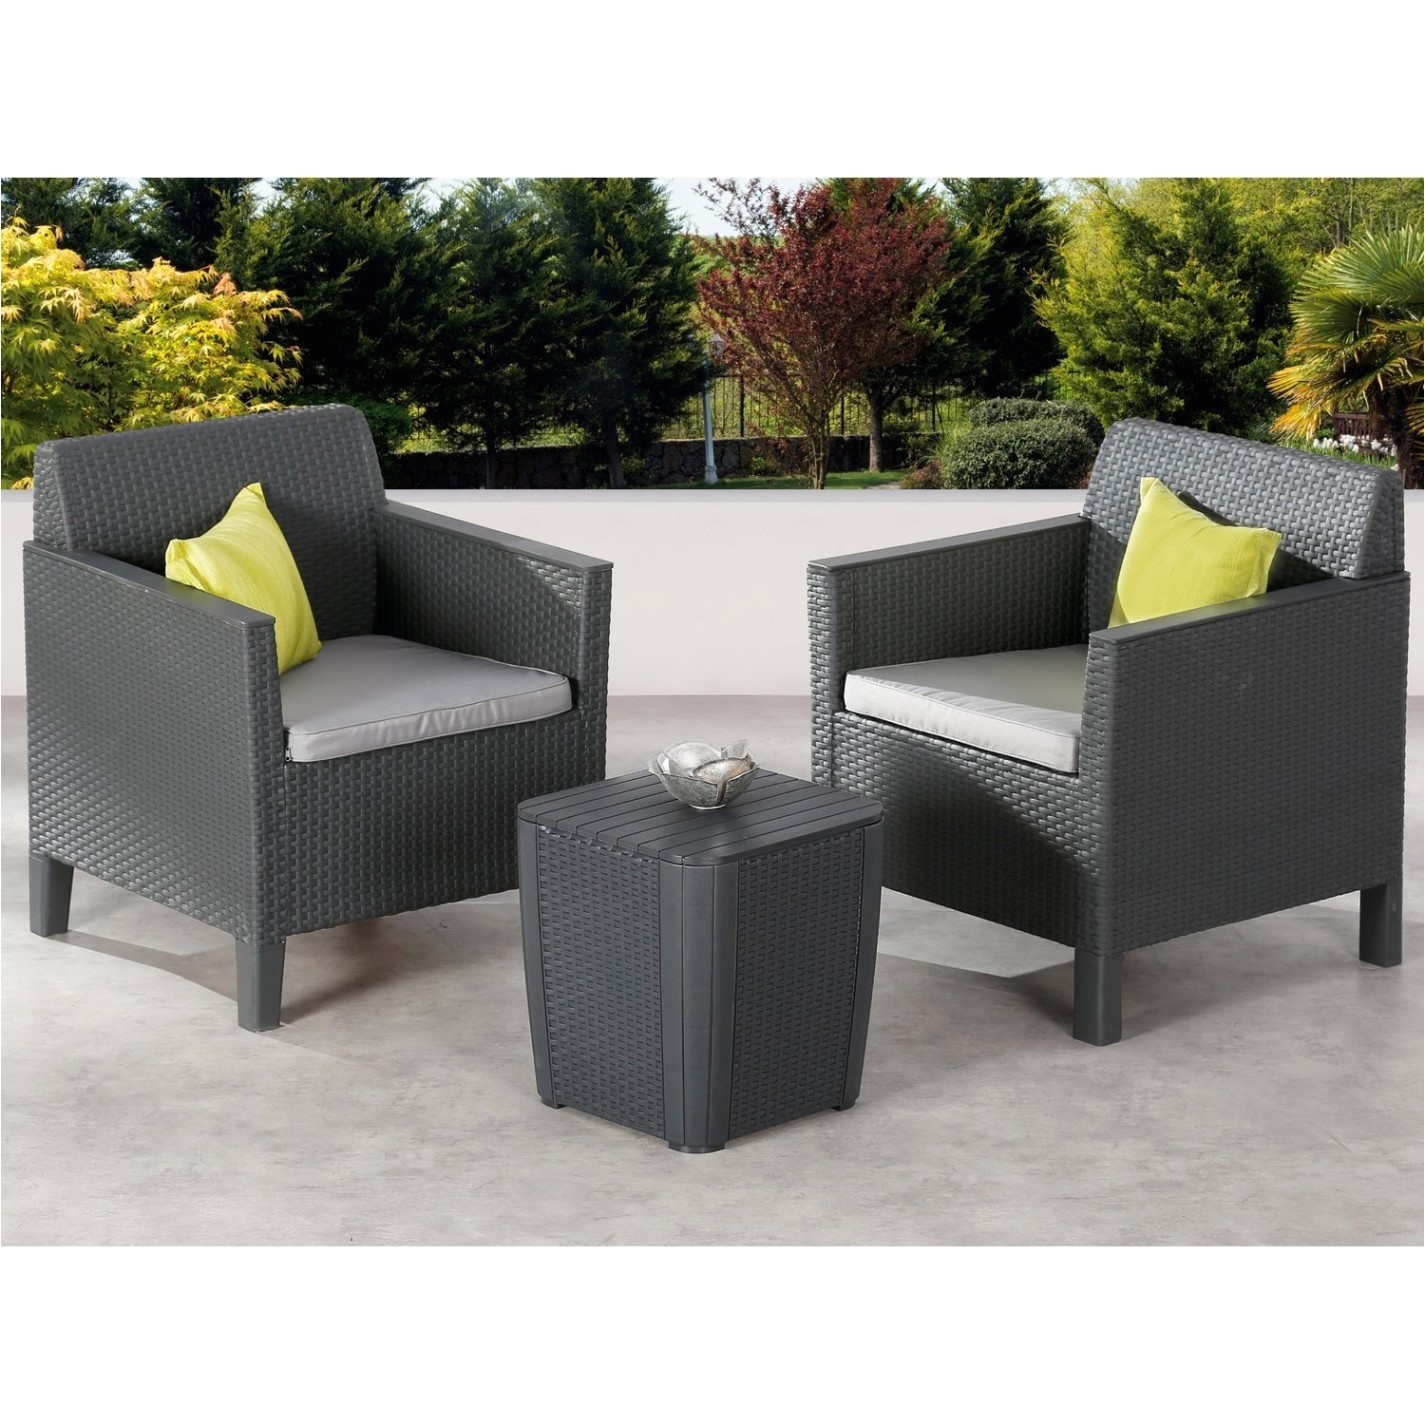 american signature outdoor patio furniture lovely great oversized sofa chair designsolutions usa of american signature outdoor